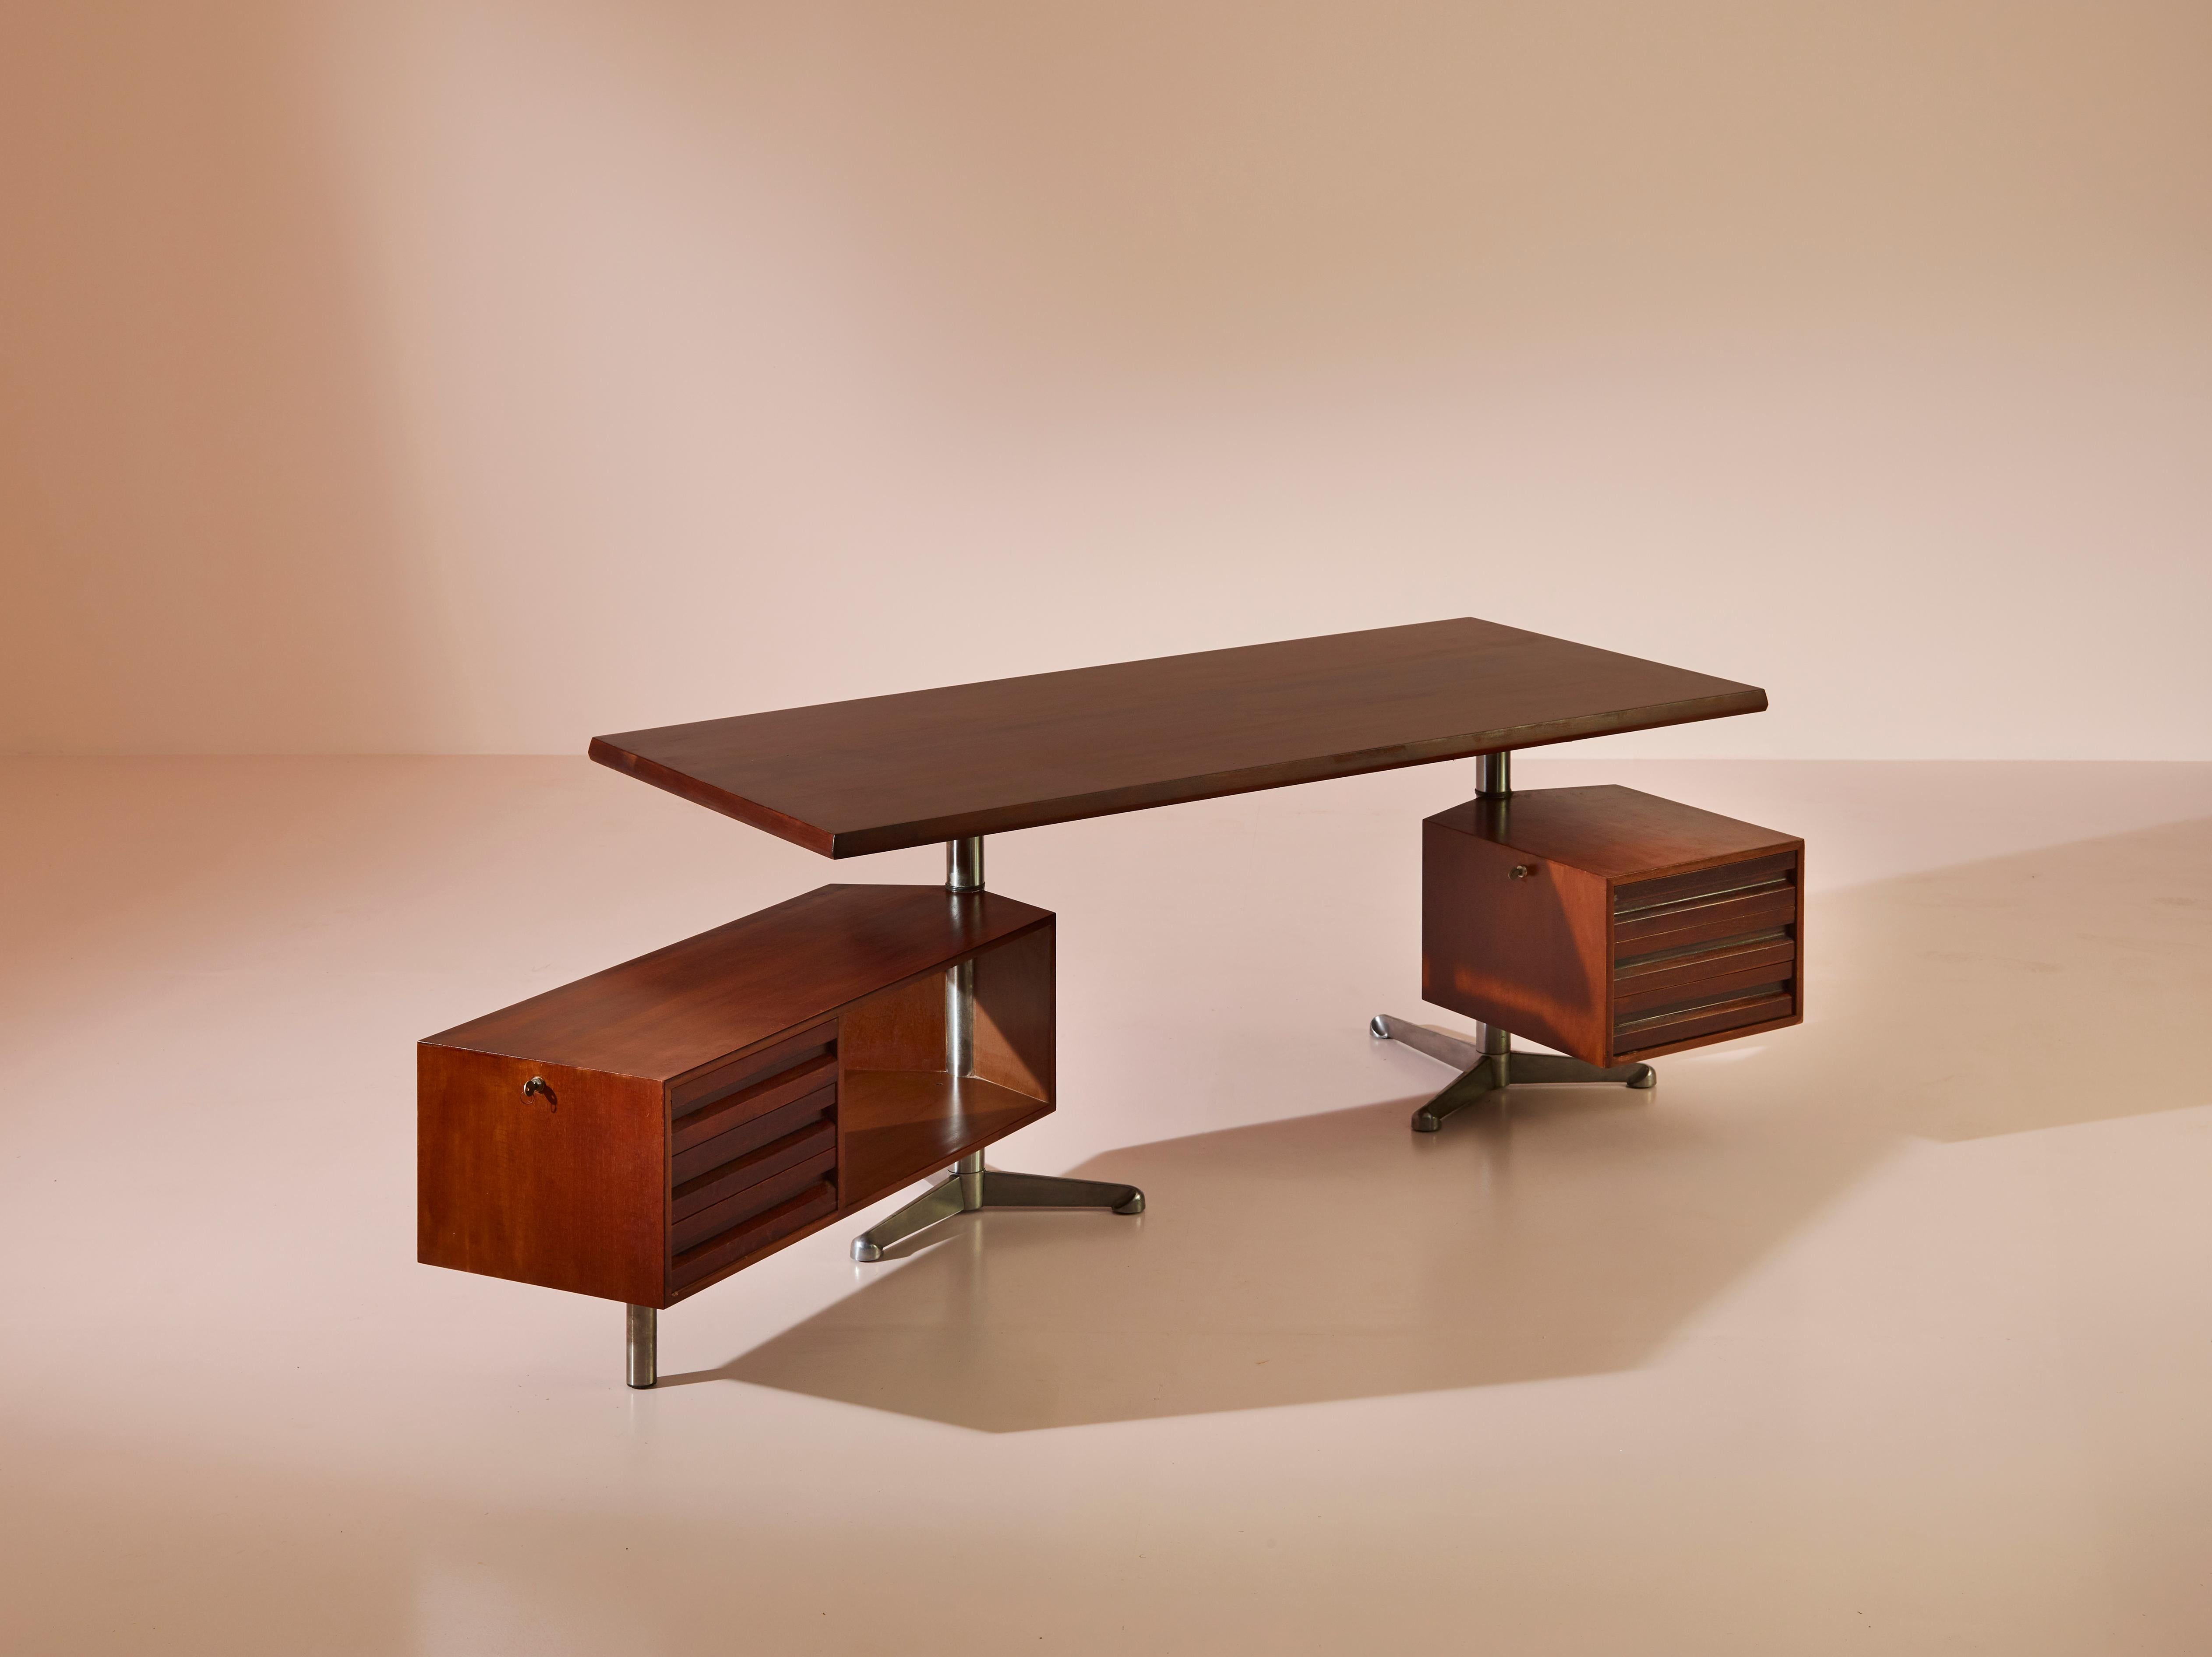 This T95 desk is a remarkable creation by the renowned designer Osvaldo Borsani for Tecno, Italy. Conceived in the 1956 and crafted towards the latter years of the same decade, this desk stands as a testament to the era's innovative and sleek